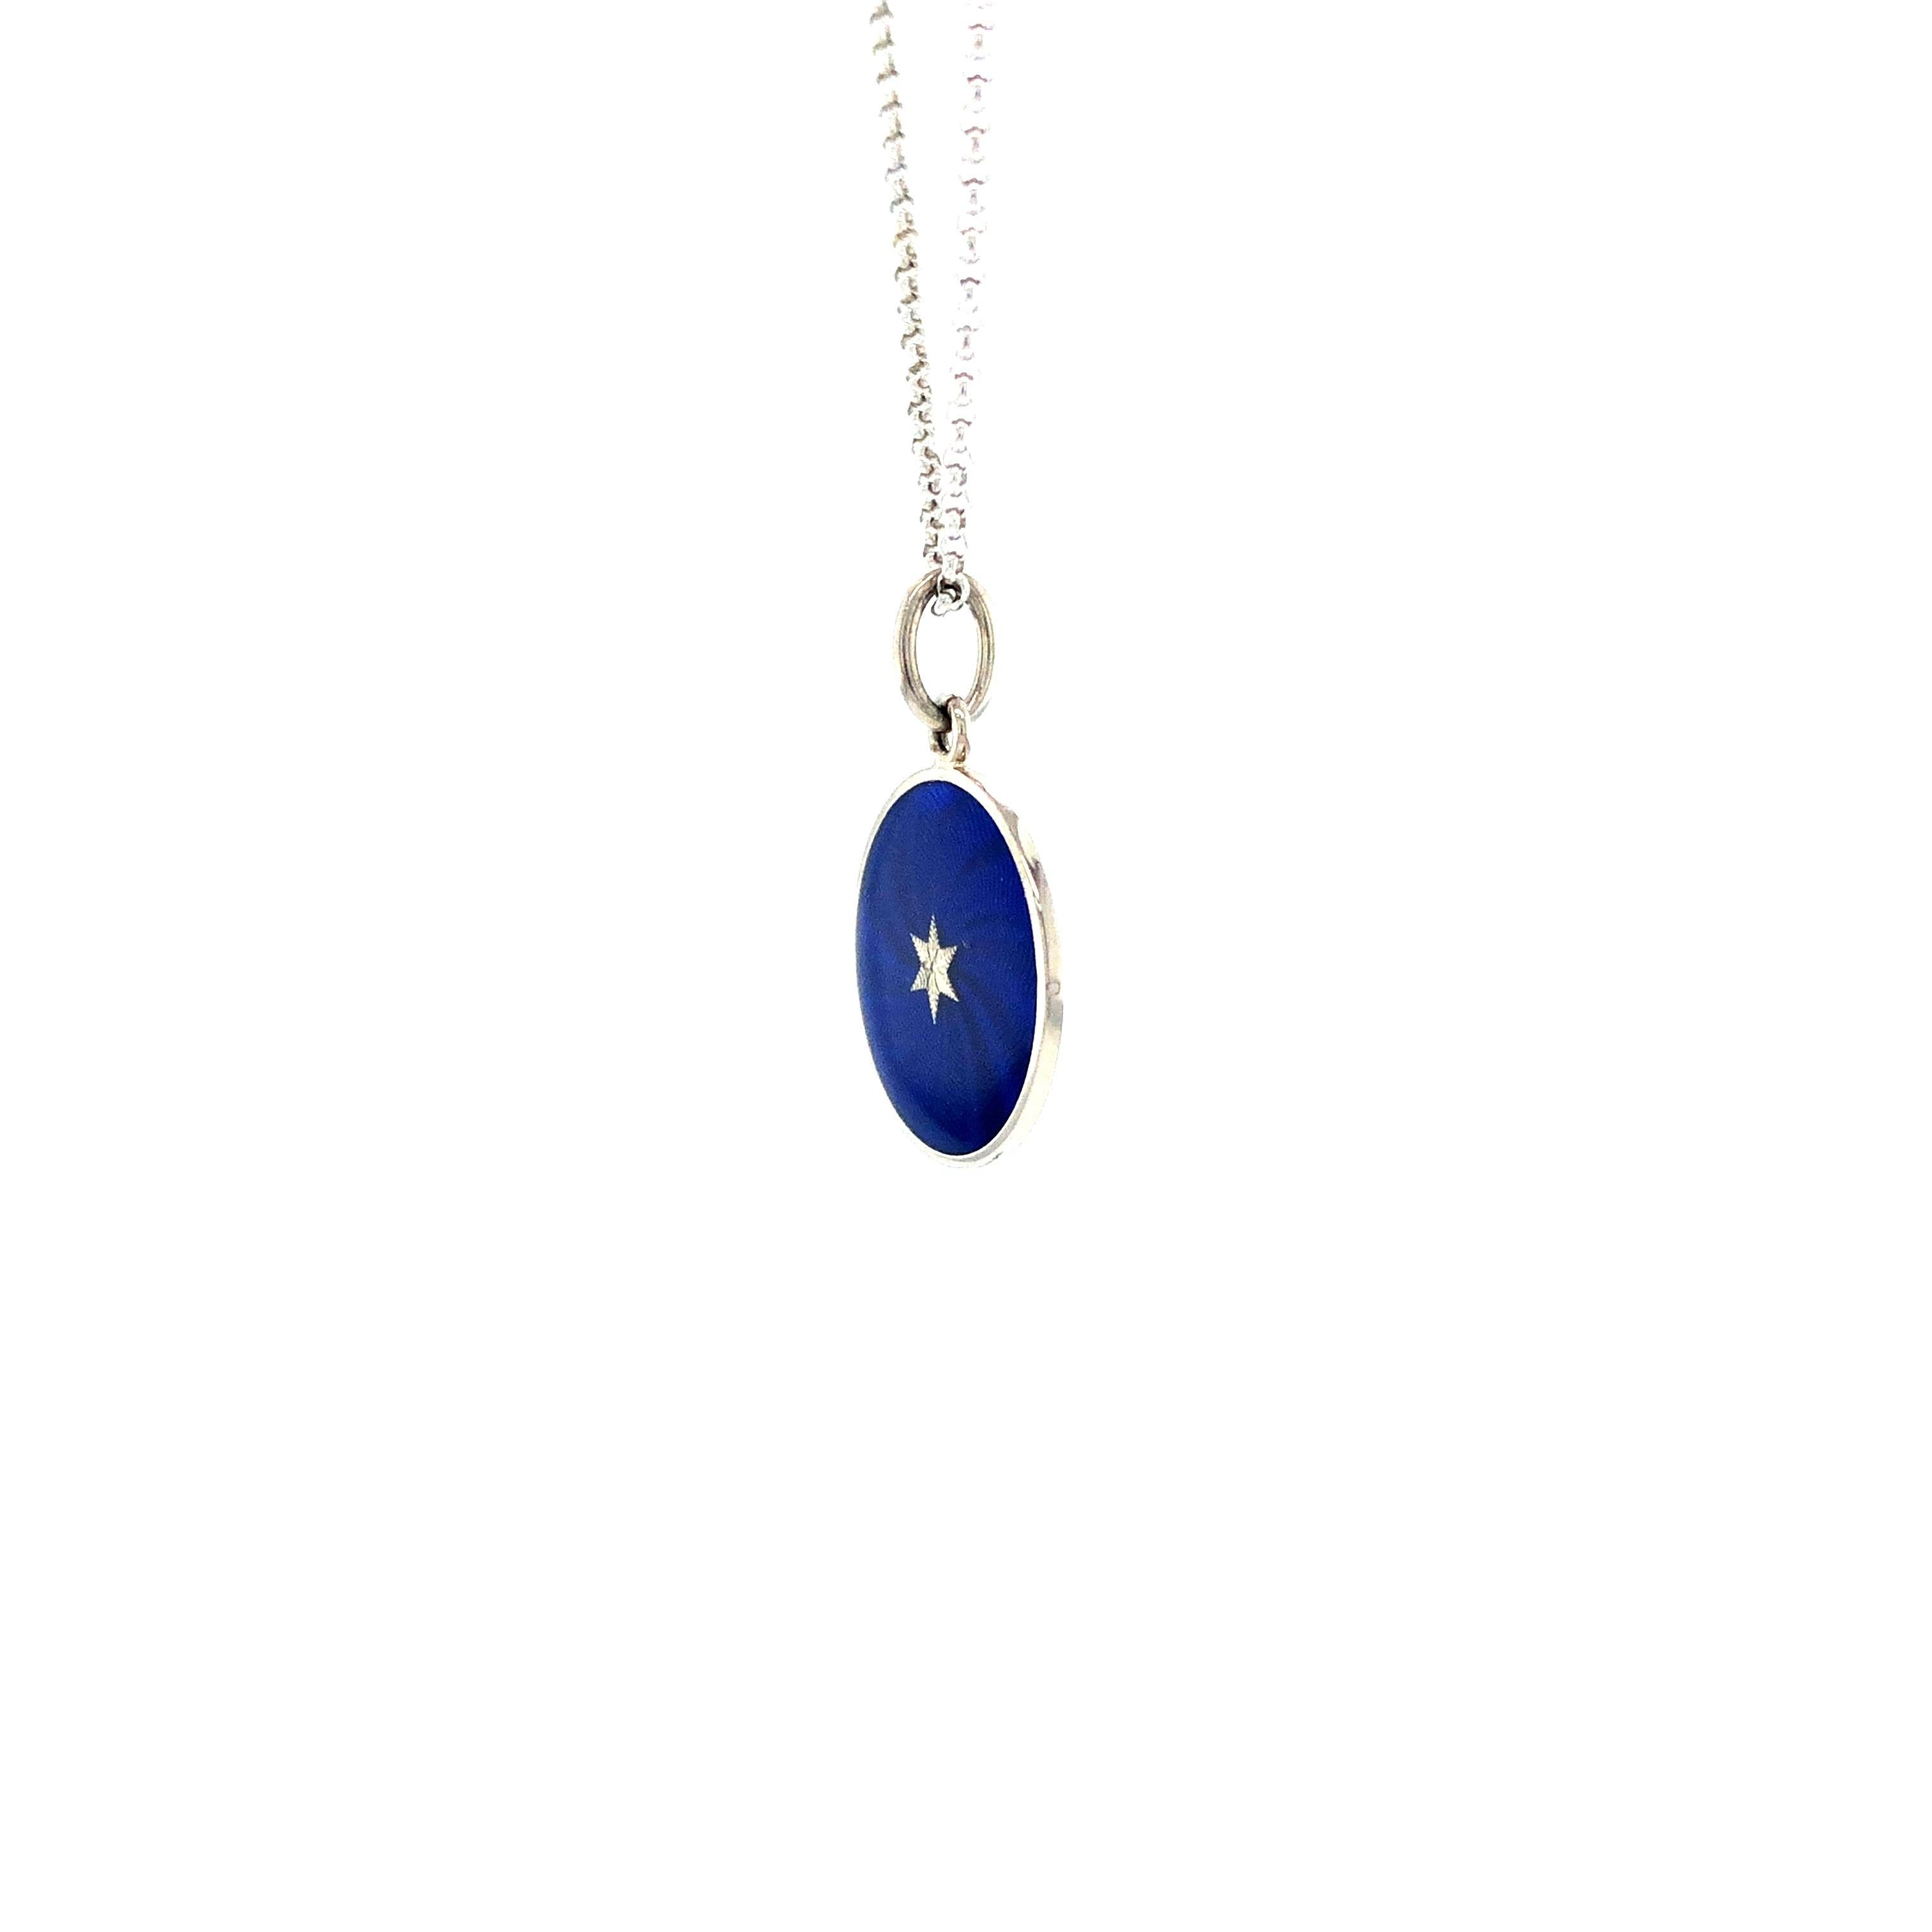 Victor Mayer round disc pendant necklace, 18k white gold, Diskos collection, royal blue vitreous, guilloche enamel with star paillon, diameter app. 15 mm

About the creator Victor Mayer
Victor Mayer is internationally renowned for elegant timeless